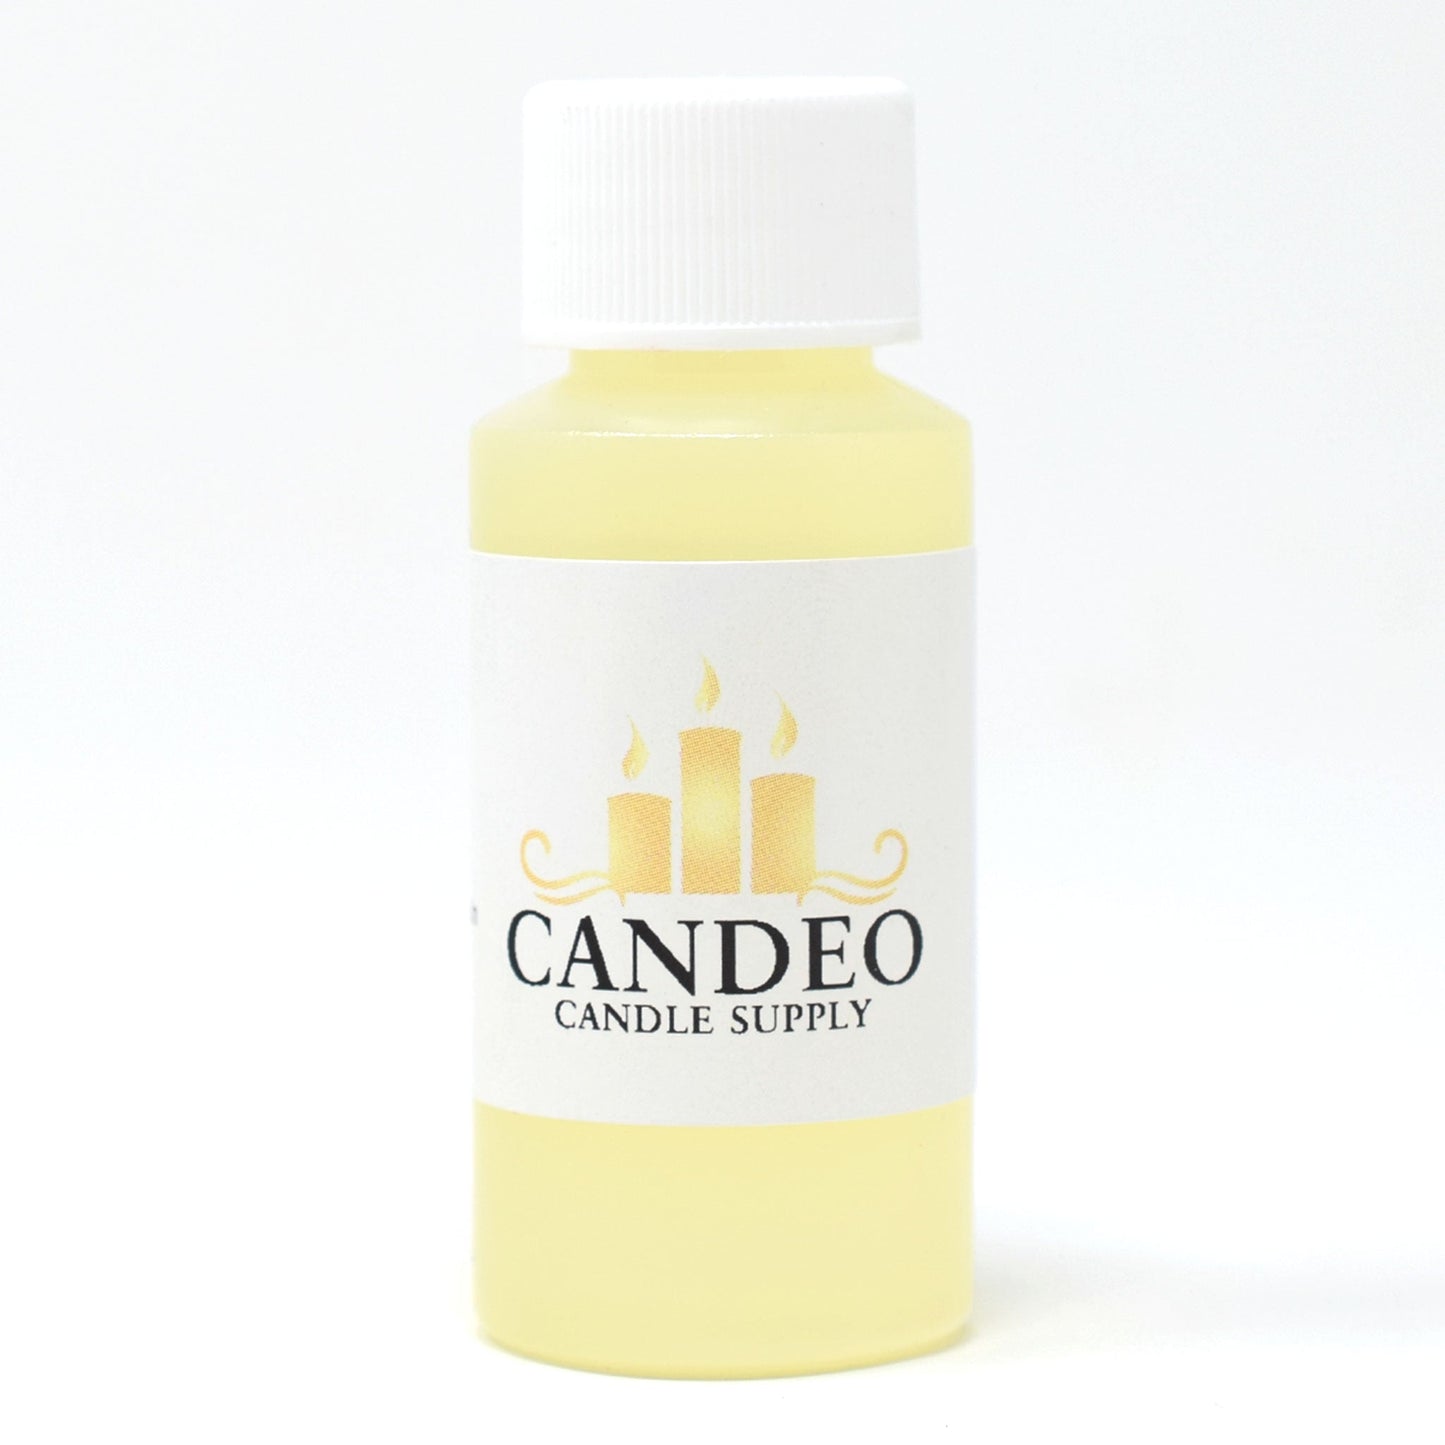 Laundry Day Fragrance Oil - Candeo Candle Supply